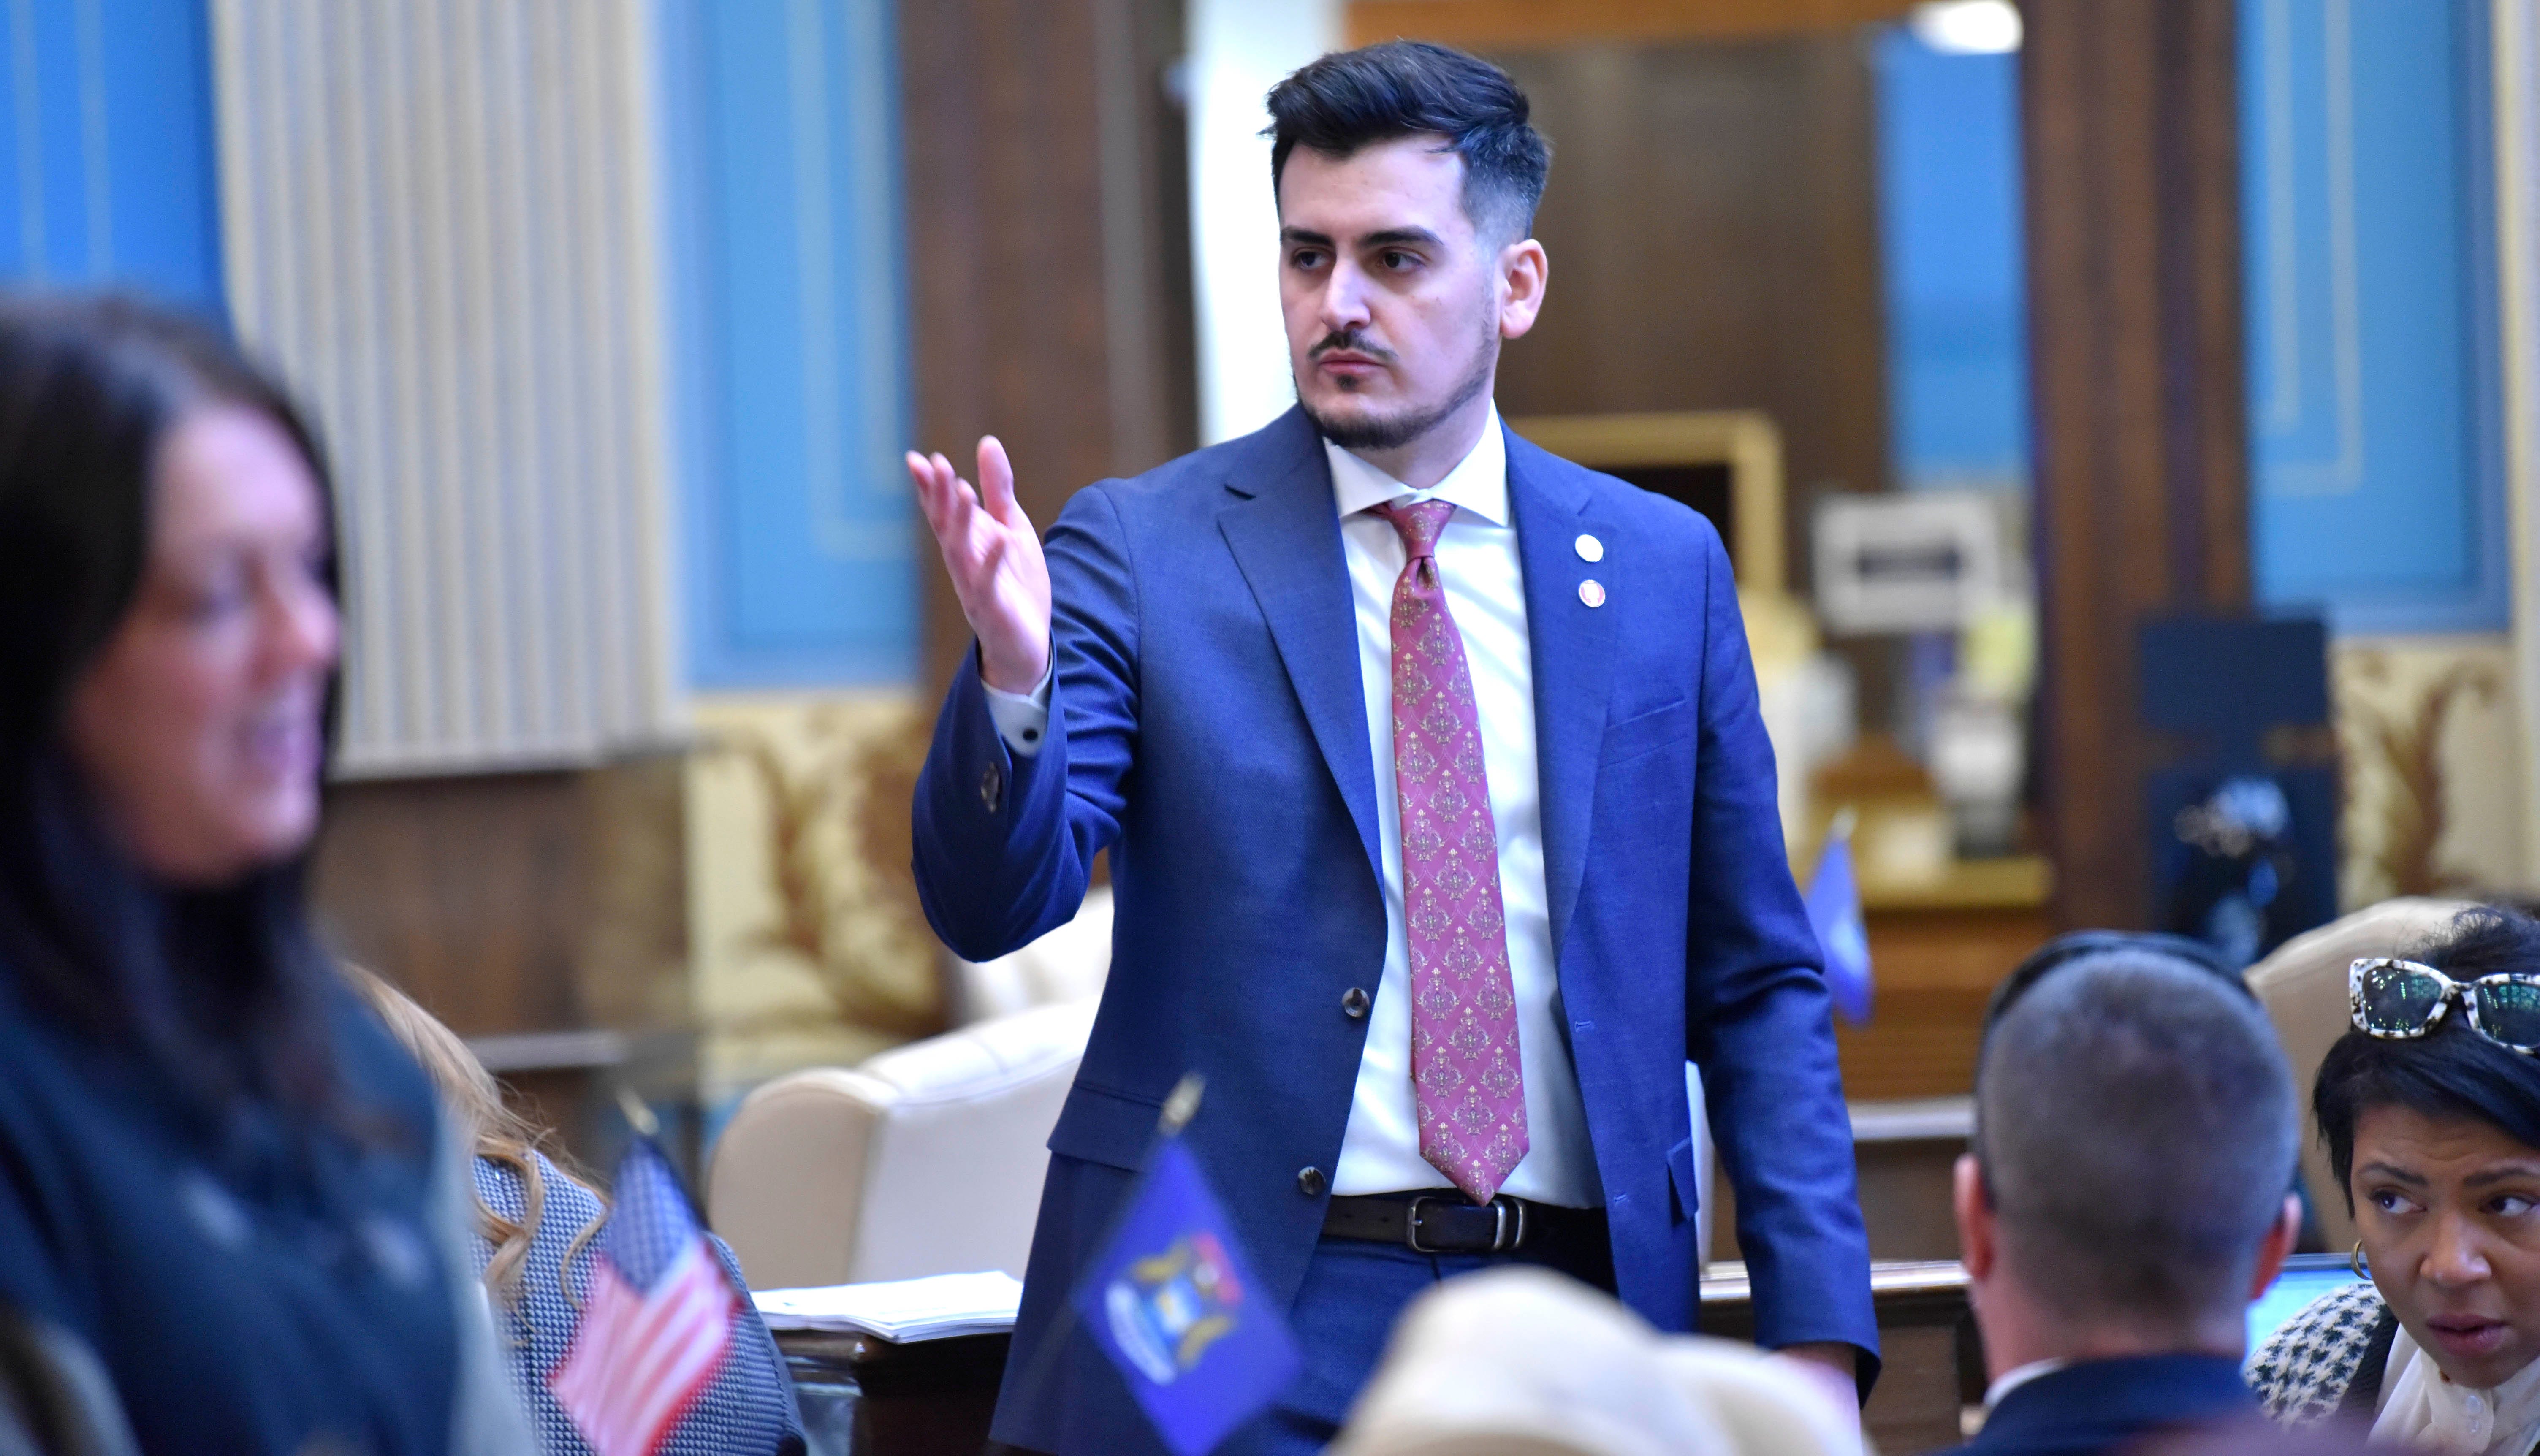 State Senator Darrin Camilleri stands as he talks to others, Tuesday morning, March 14, 2023.